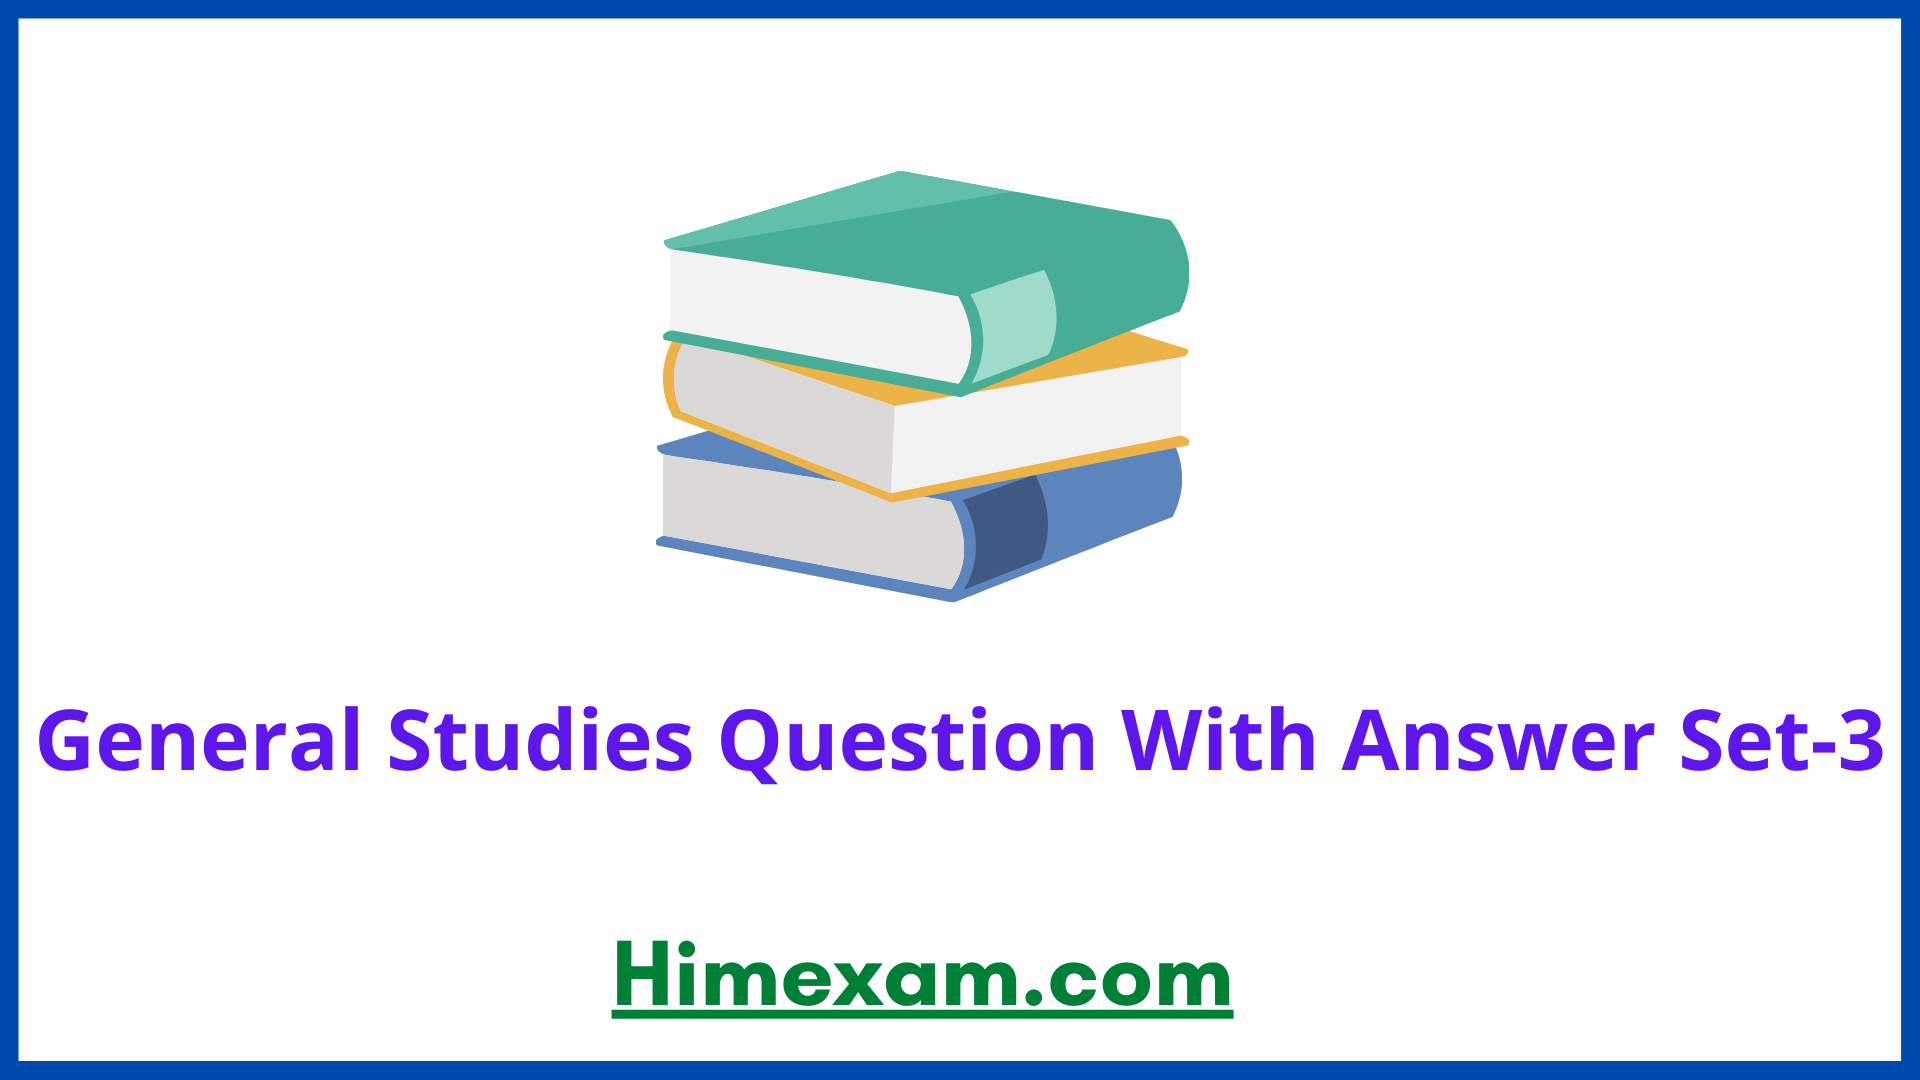 General Studies Question With Answer Set-3